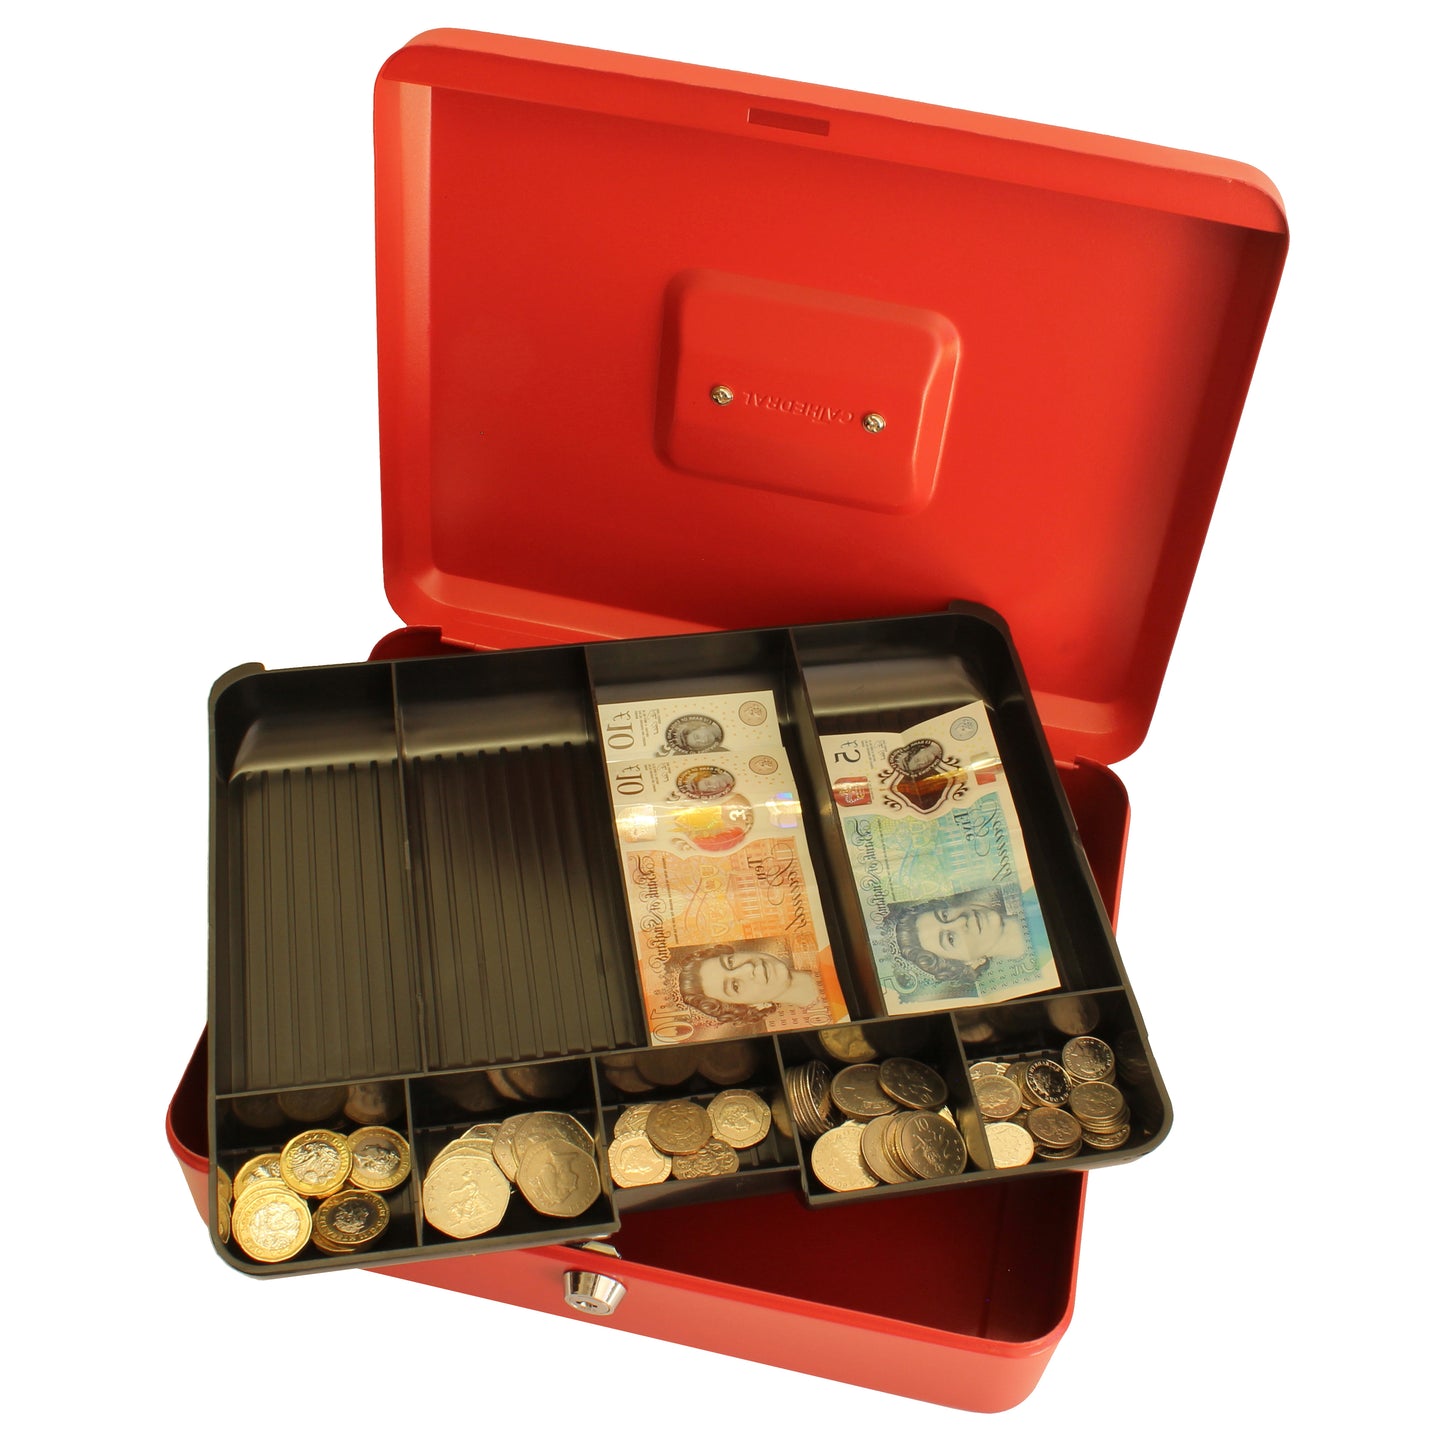 Key Lockable Cash Box with Lift Out 9 Compartment Coin Tray - 12 Inch